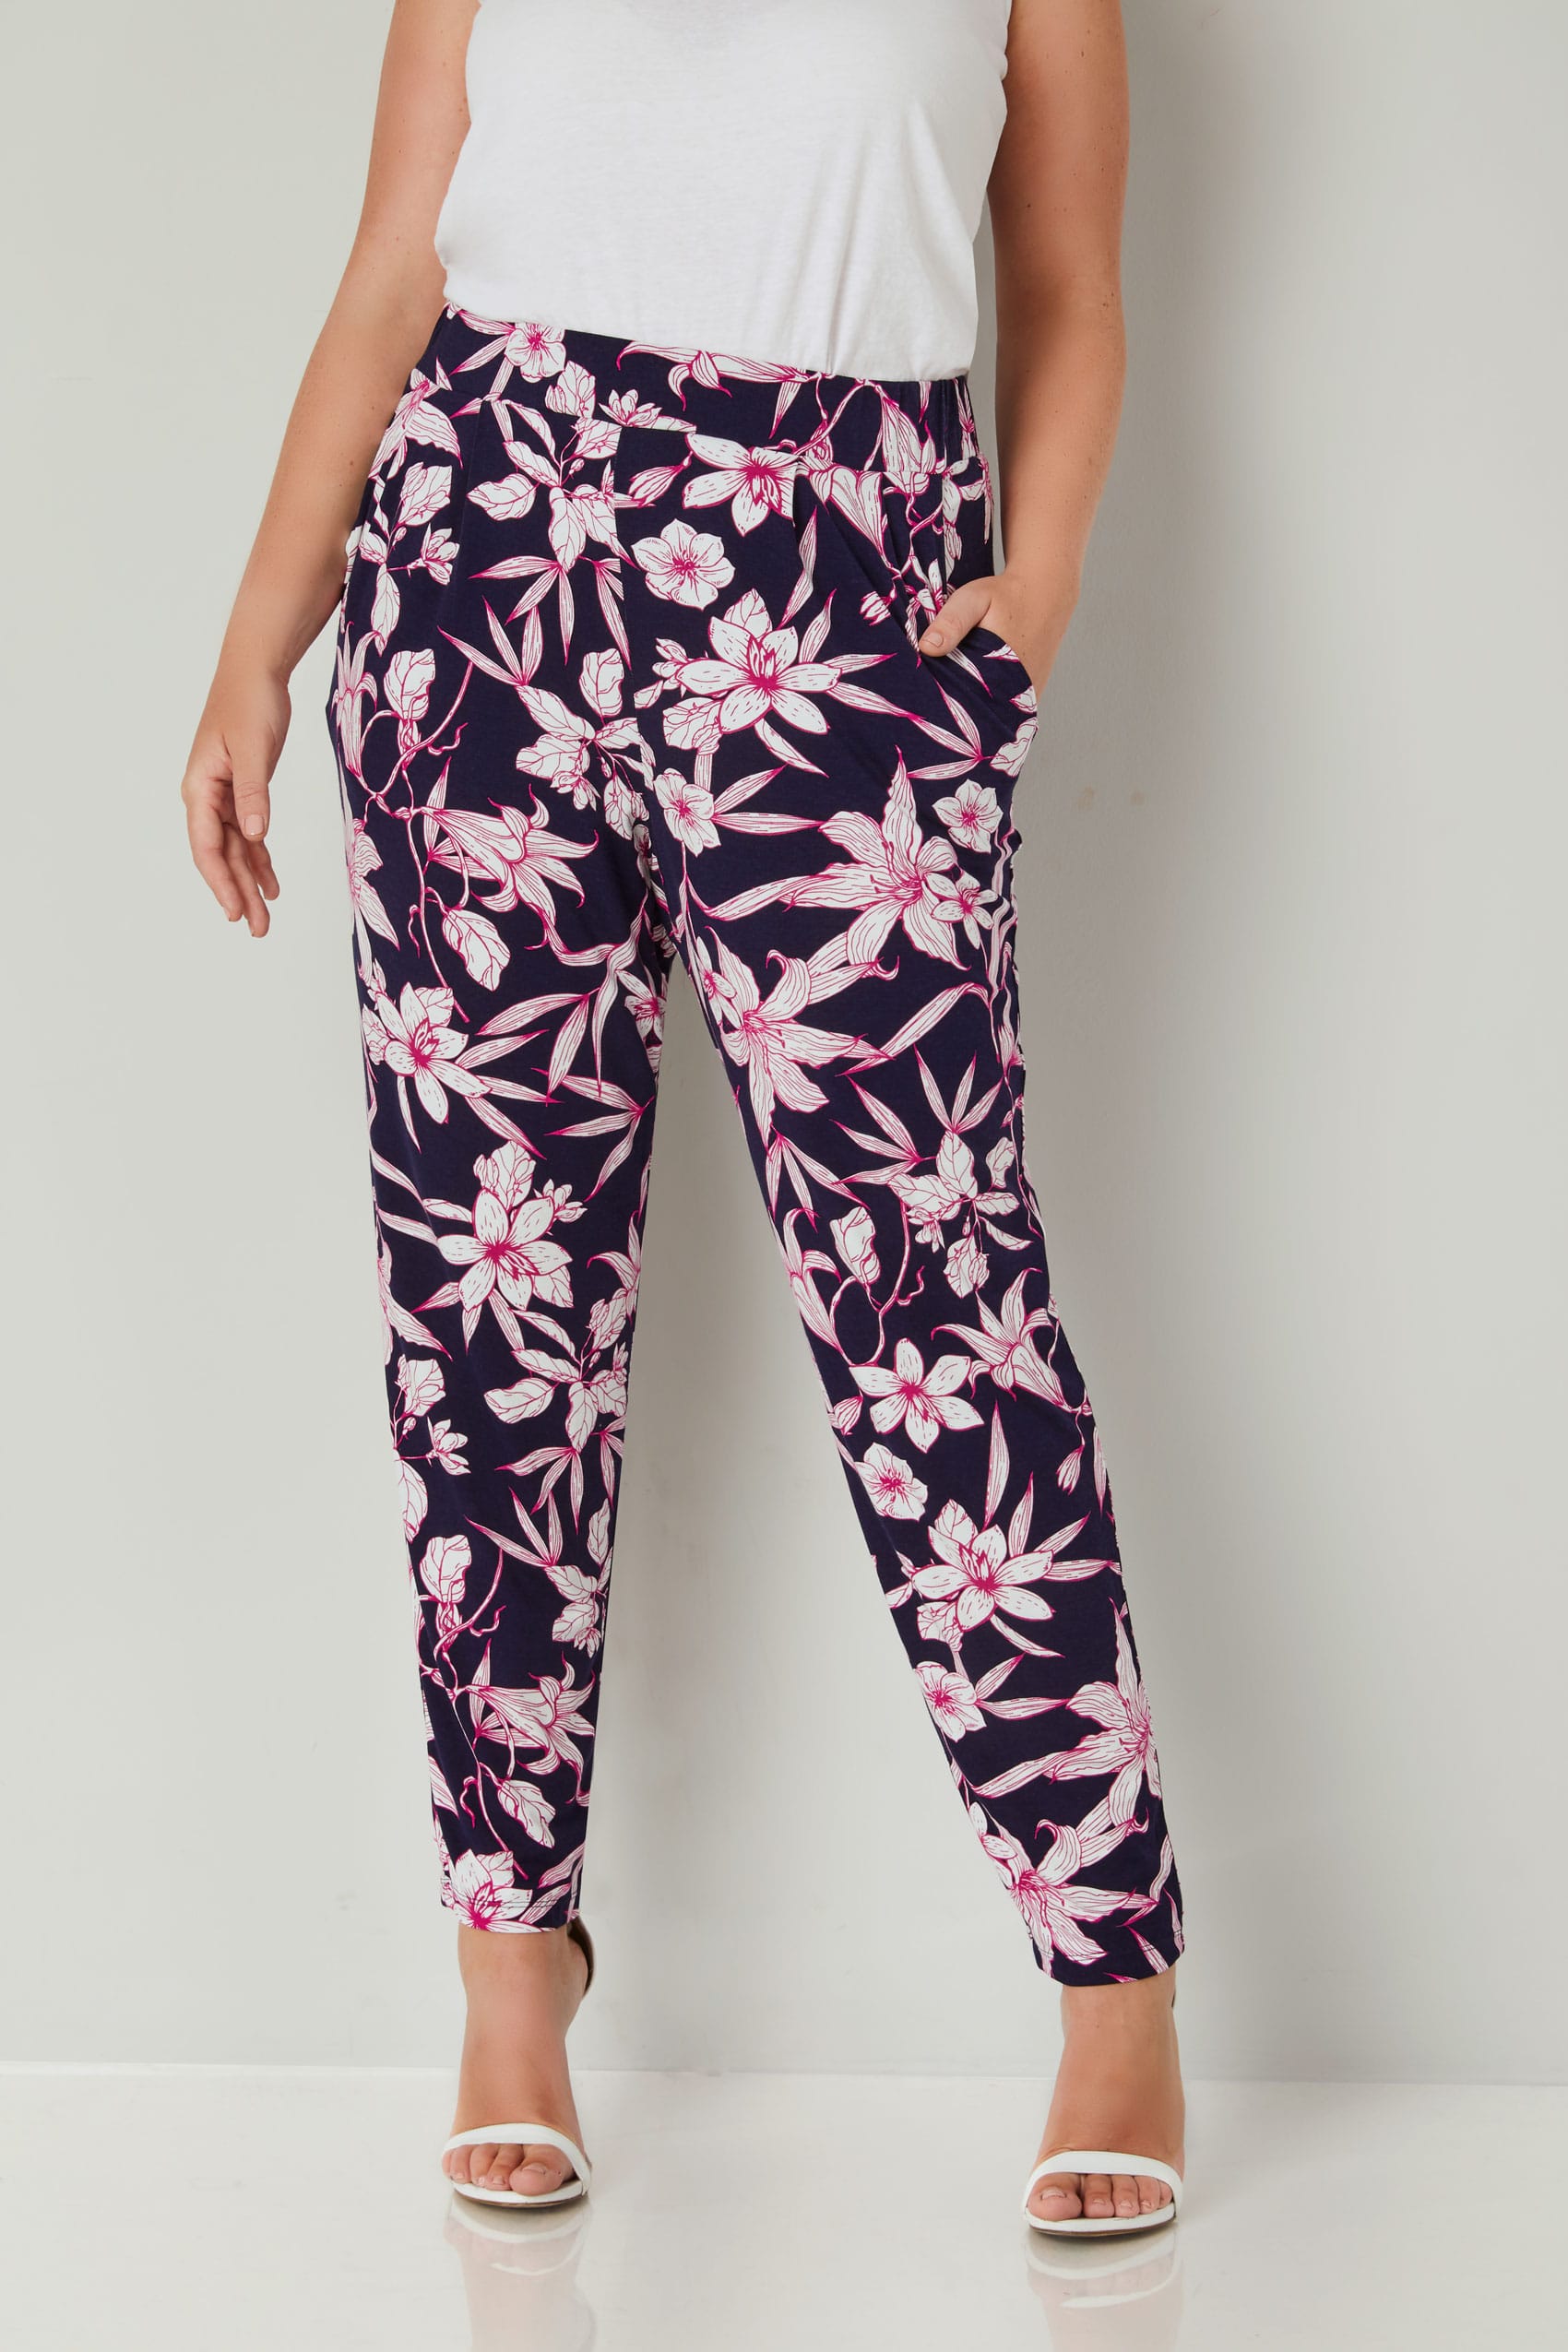 Navy & Pink Floral Print Jersey Harem Trousers, Plus size 16 to 36